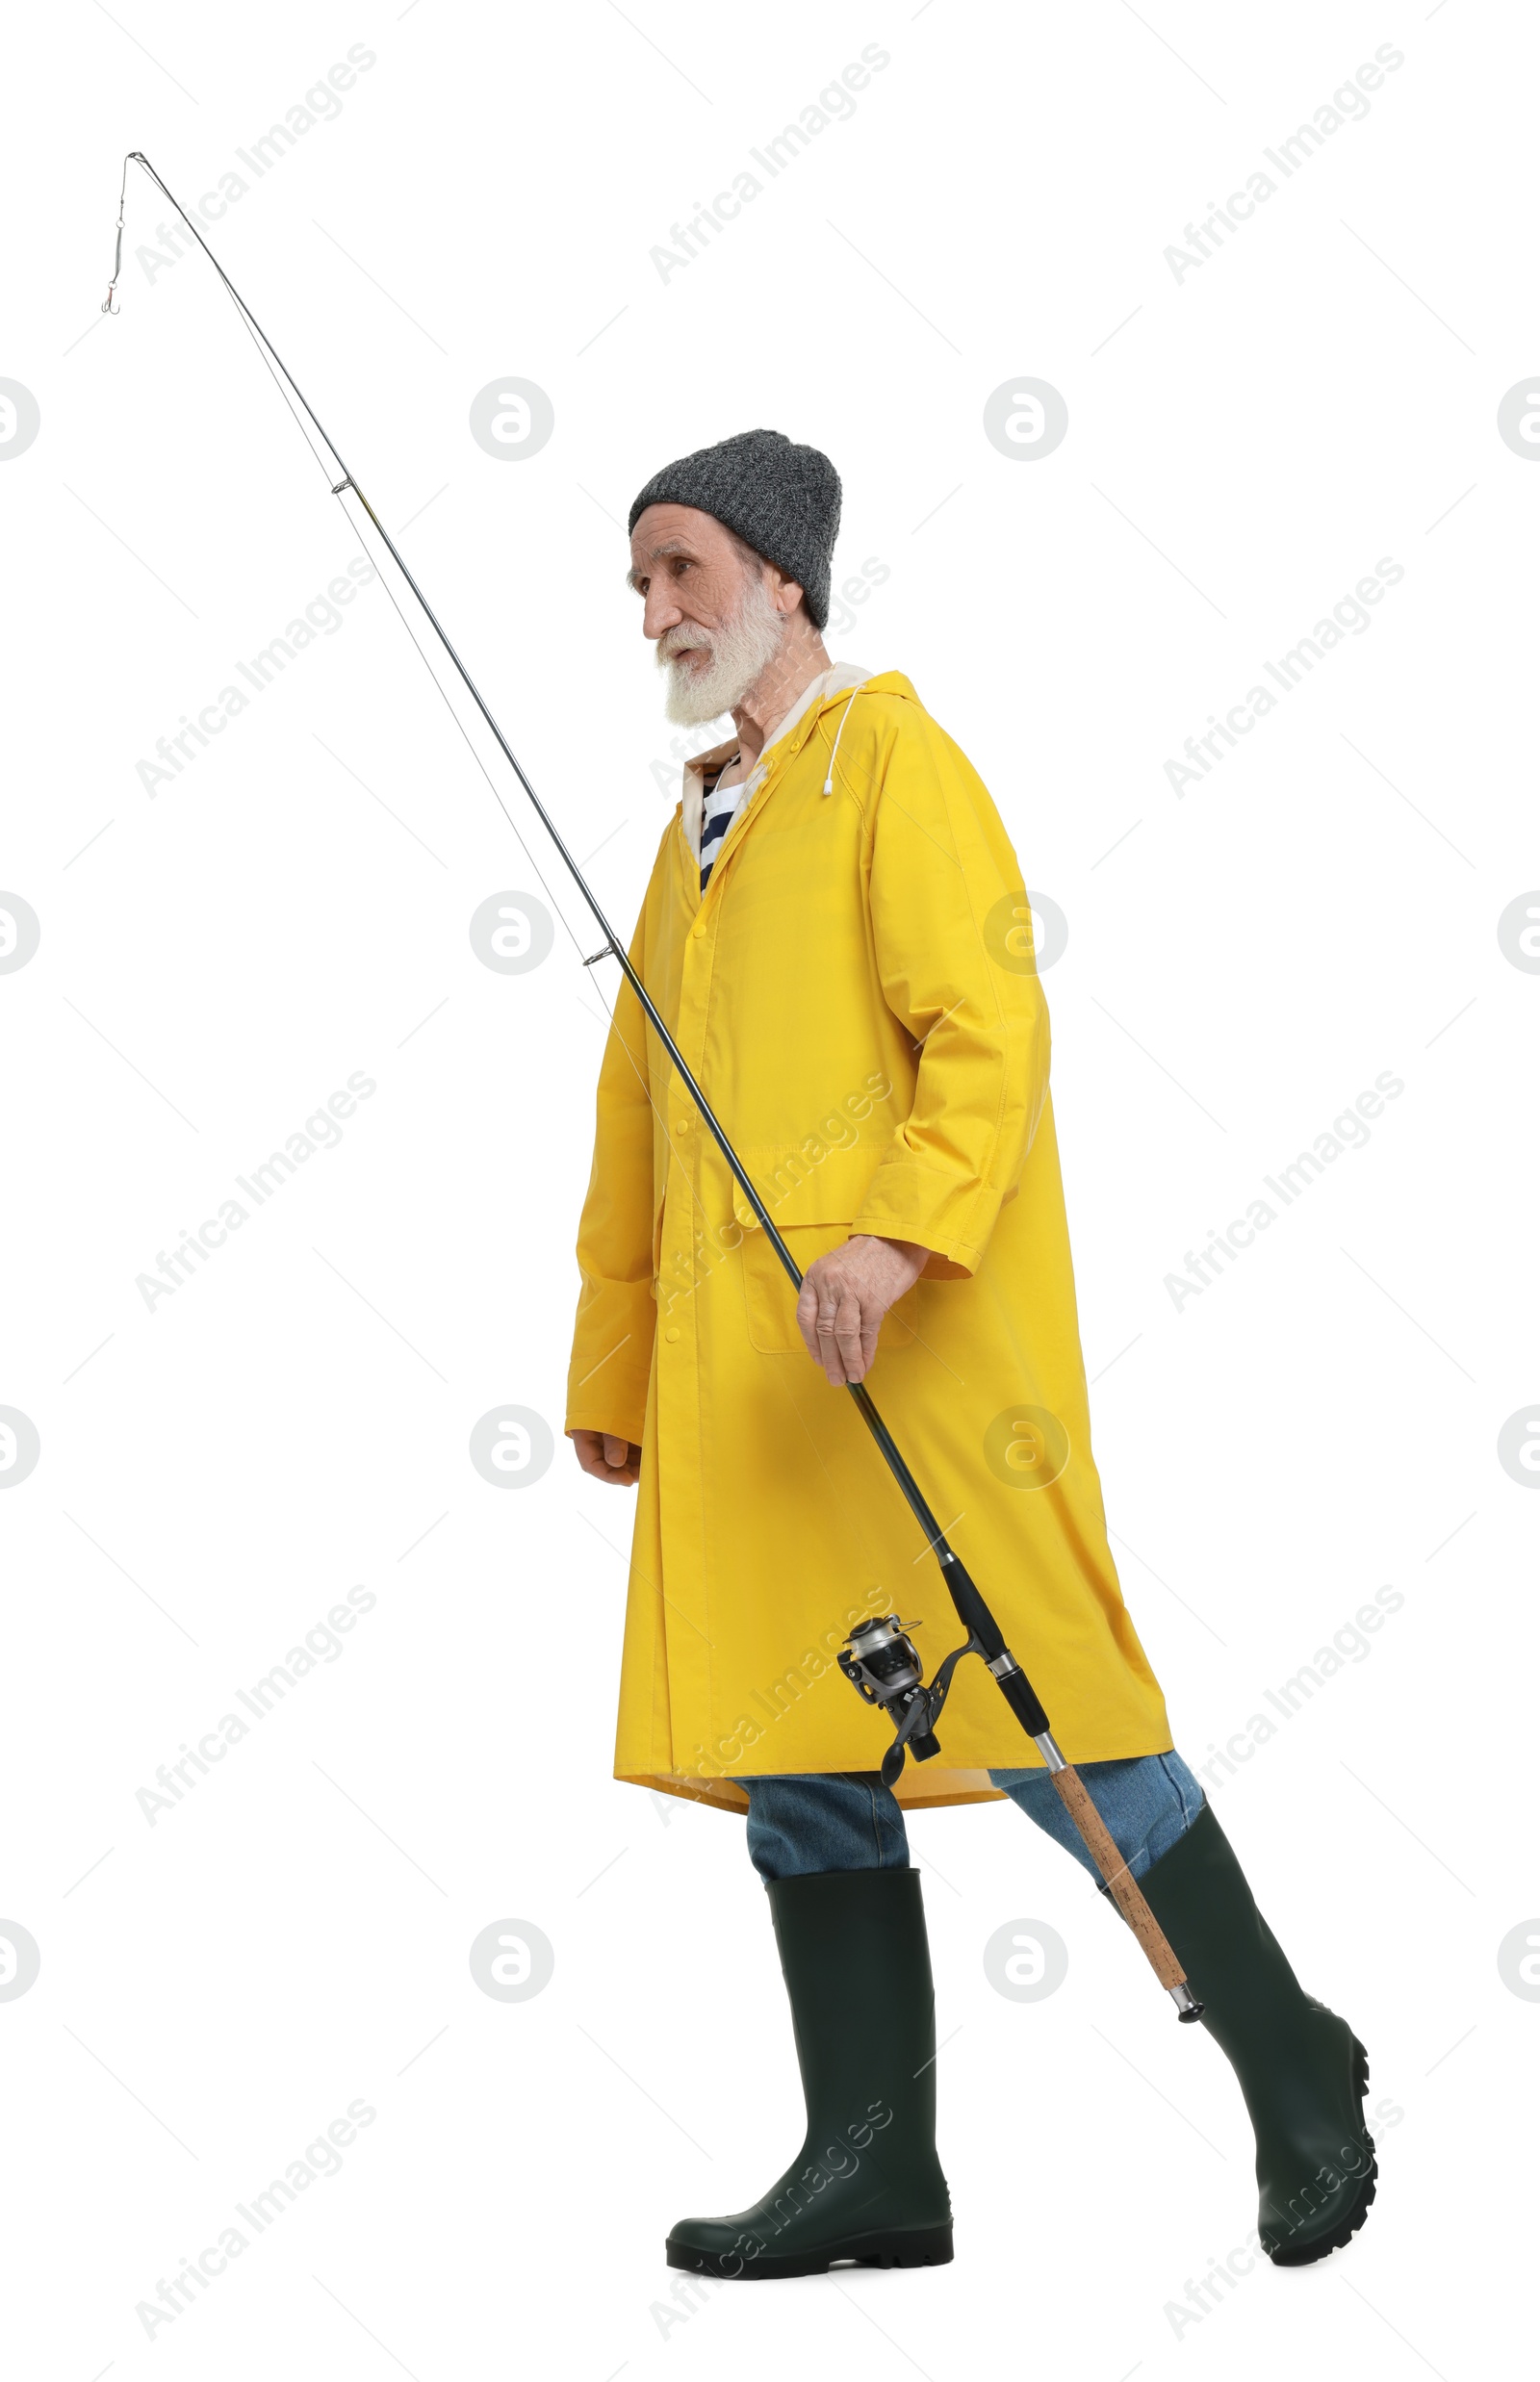 Photo of Fisherman with fishing rod isolated on white